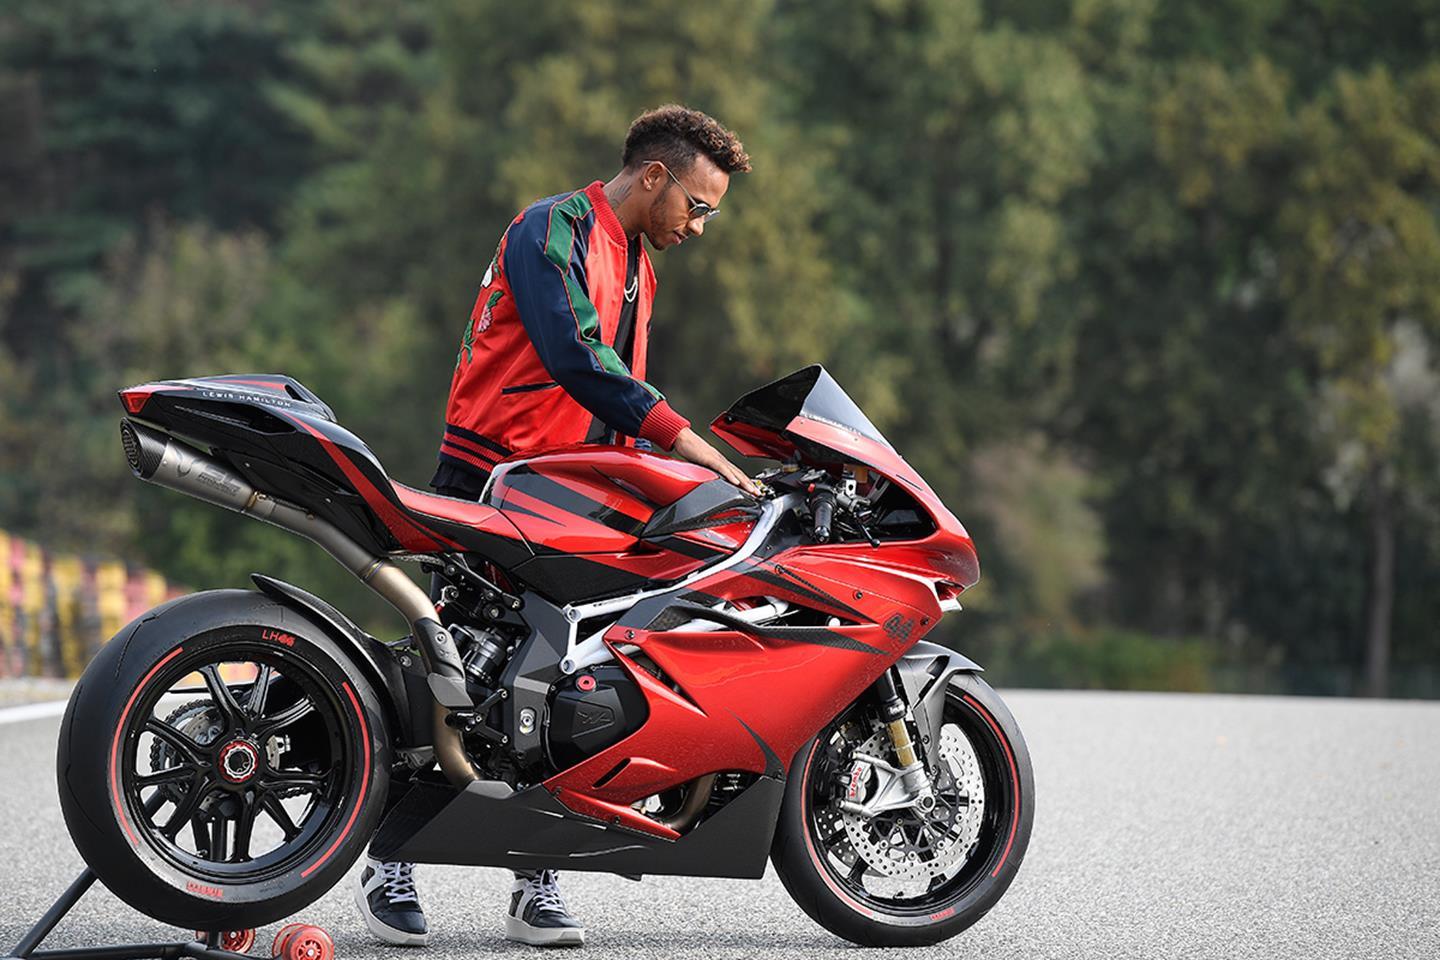 MV Agusta F4 LH44 is a limited edition in collaboration with Lewis Hamilton. The F1 world champion is pictured here with the bike